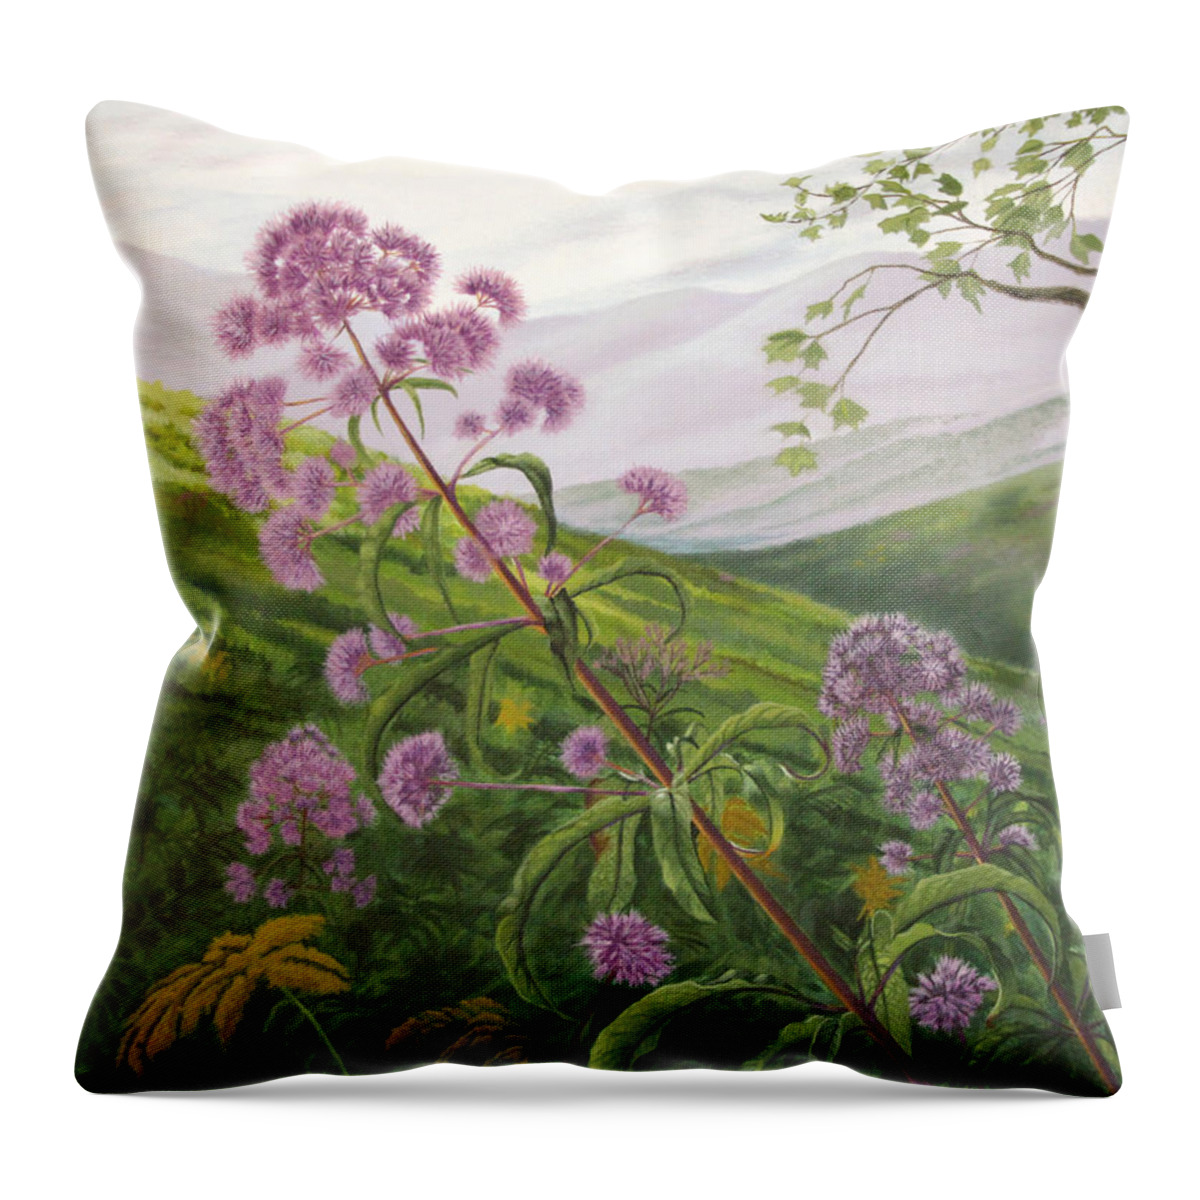 Flower Throw Pillow featuring the painting Joe Pye Weed by Adrienne Dye